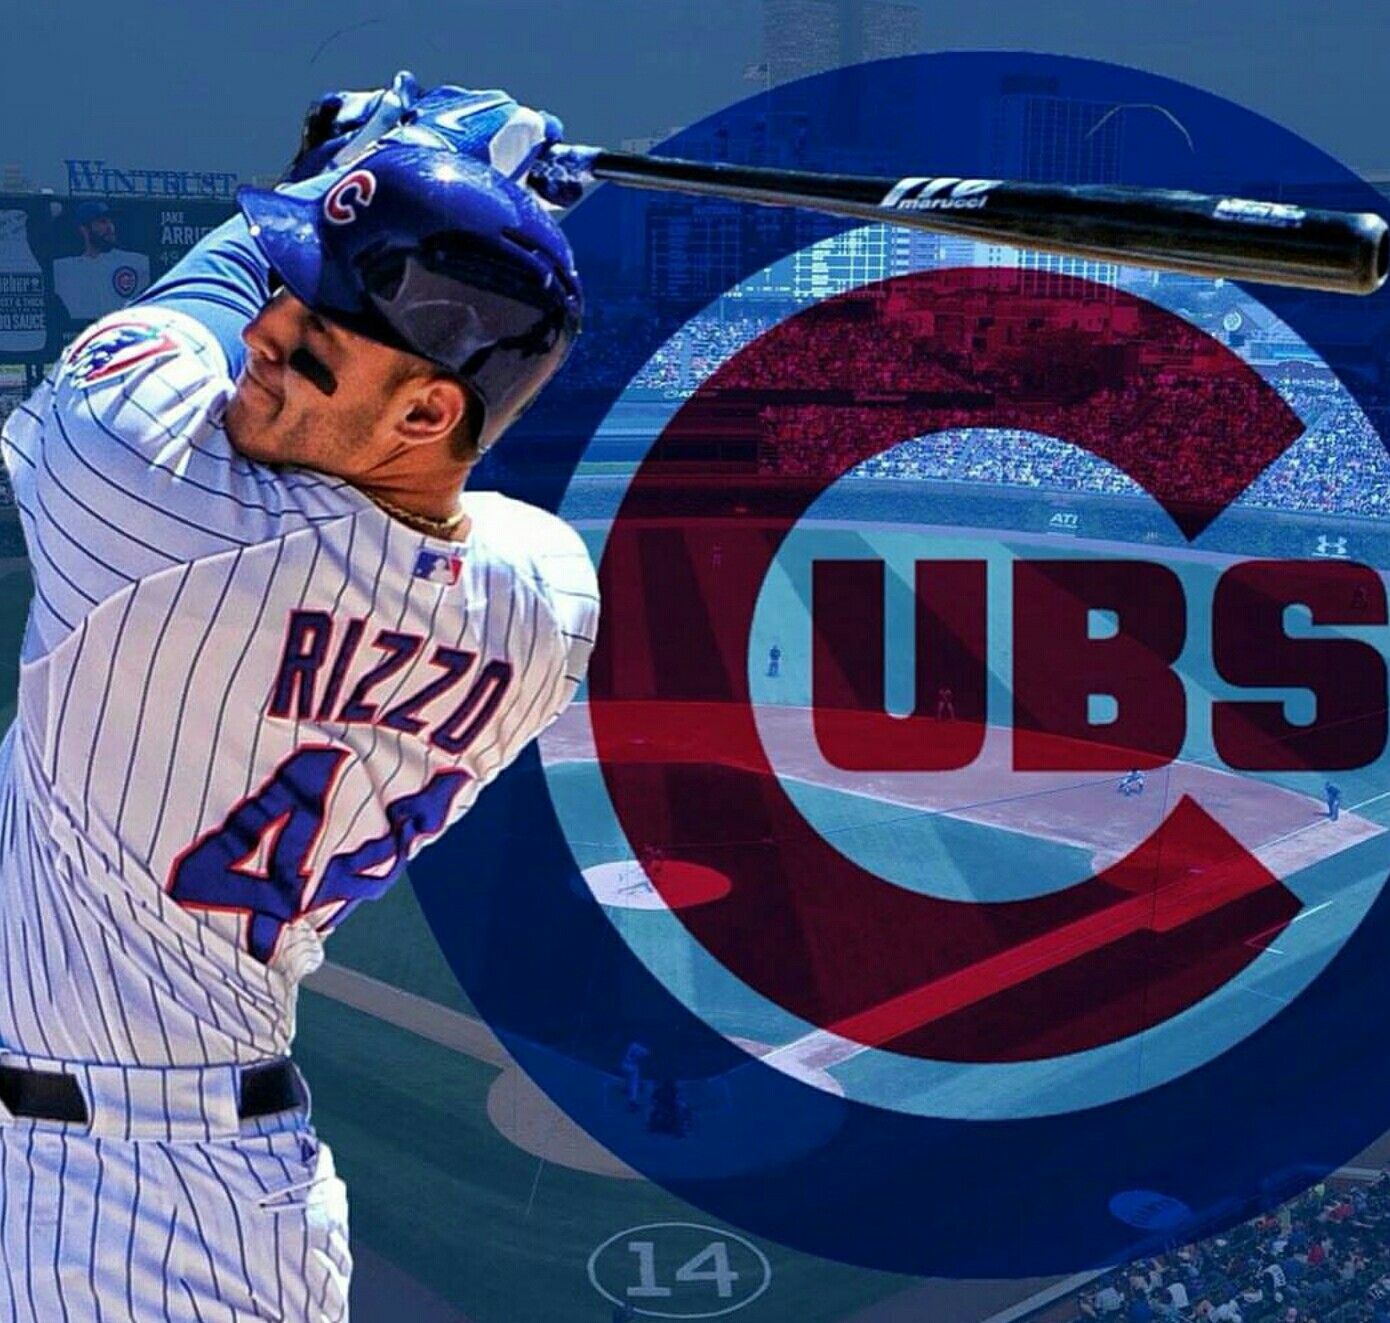 Pin by Mia on Chicago Cubs Players  Cubs baseball, Cubs players, Hot baseball  players